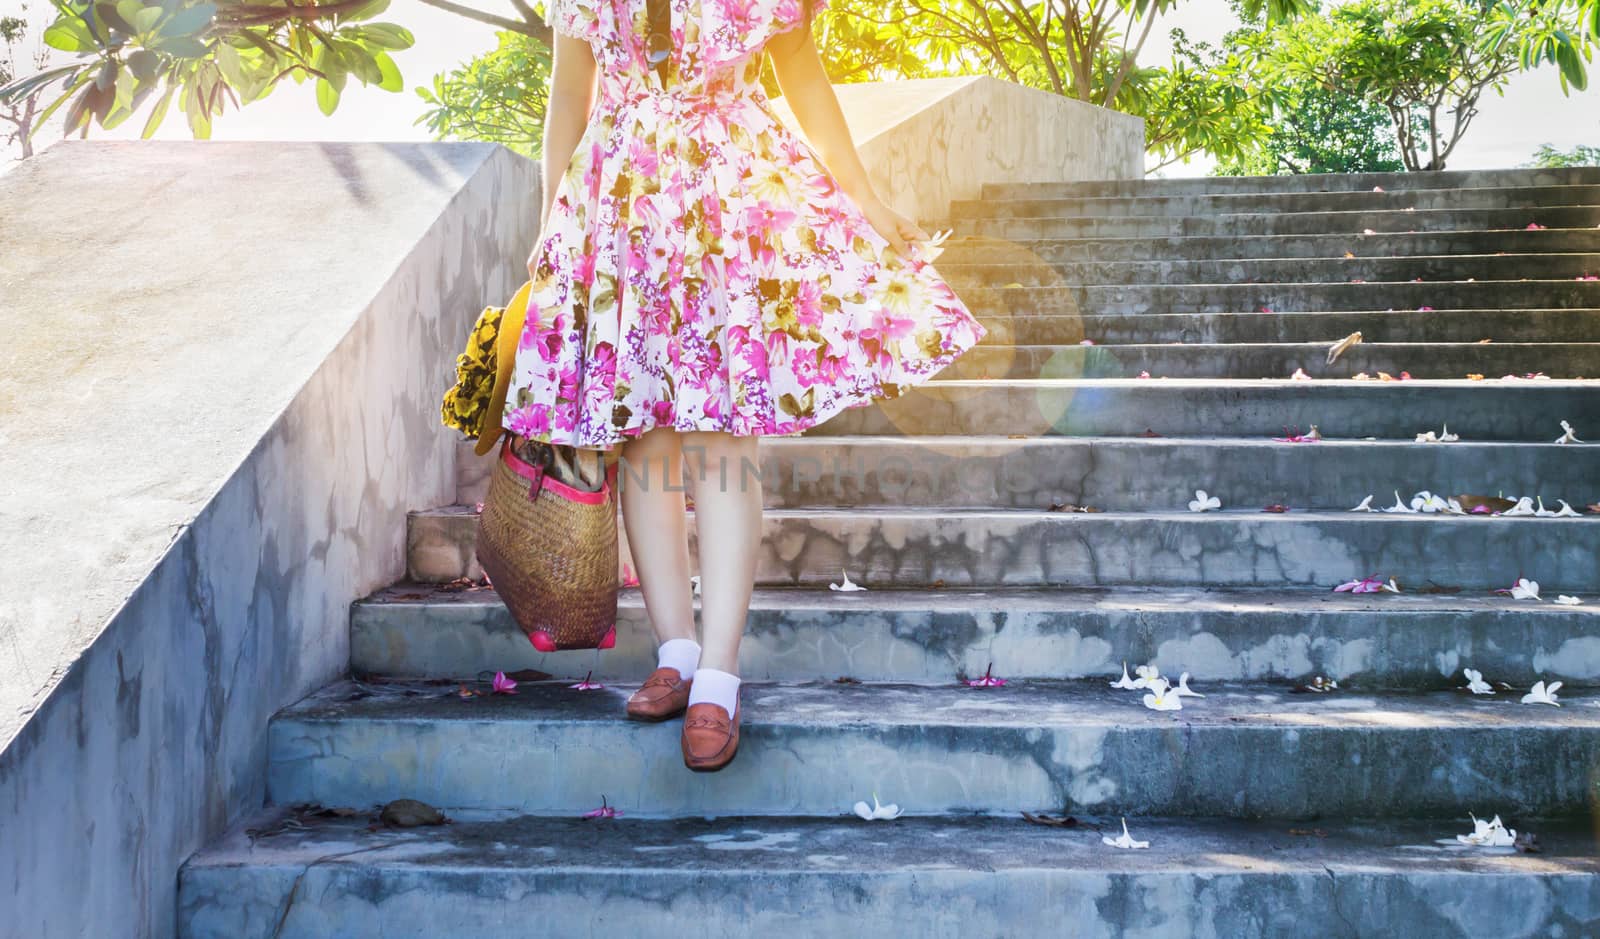 Focused at walking down on concrete stair, girl or women in flowers pattern dress with summer feeling, women go for a walk in spring or summer